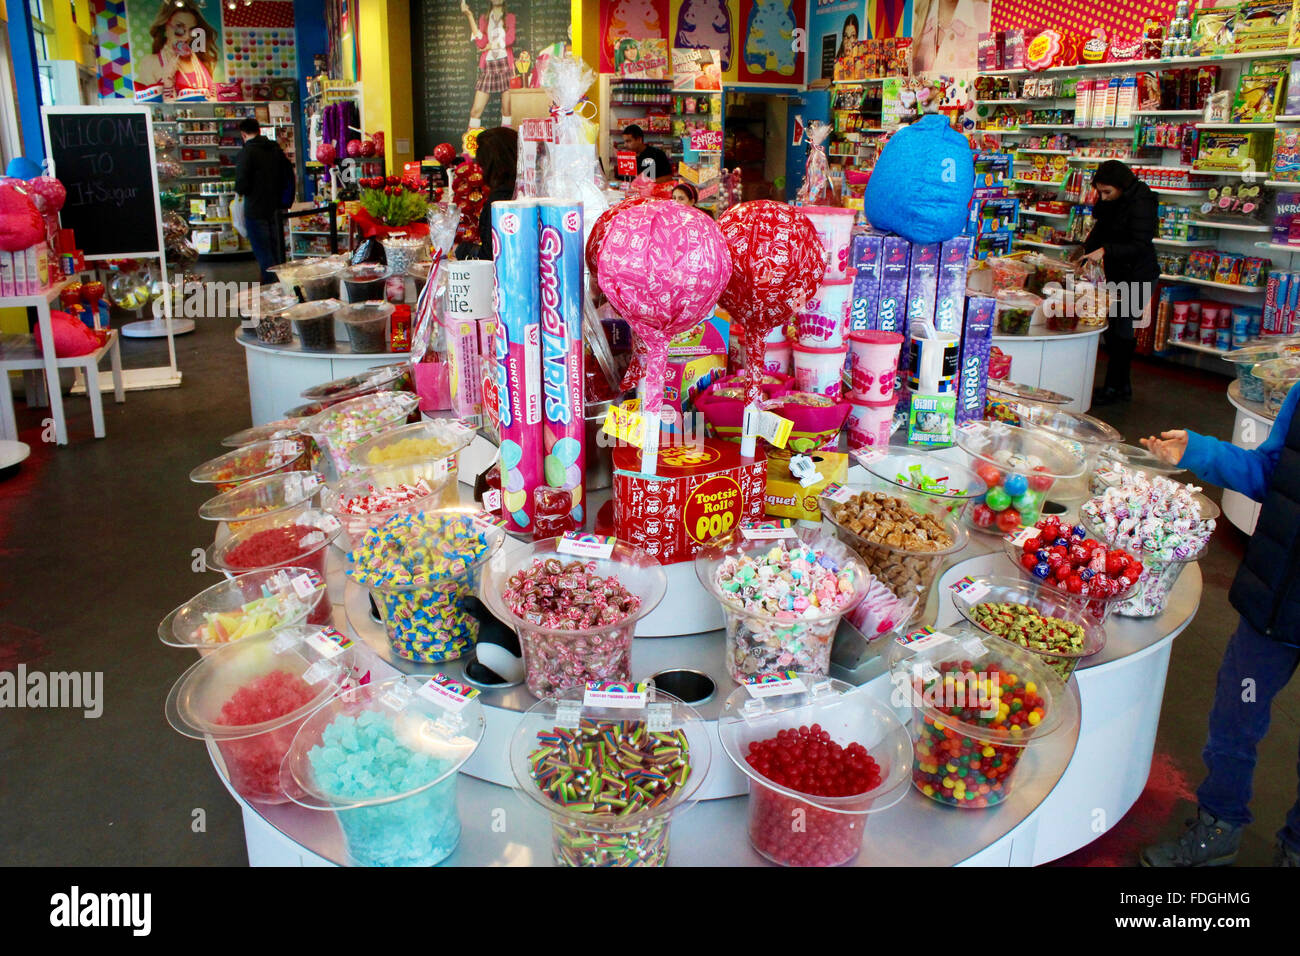 it's sugar store coney island brooklyn sweets candy Stock Photo